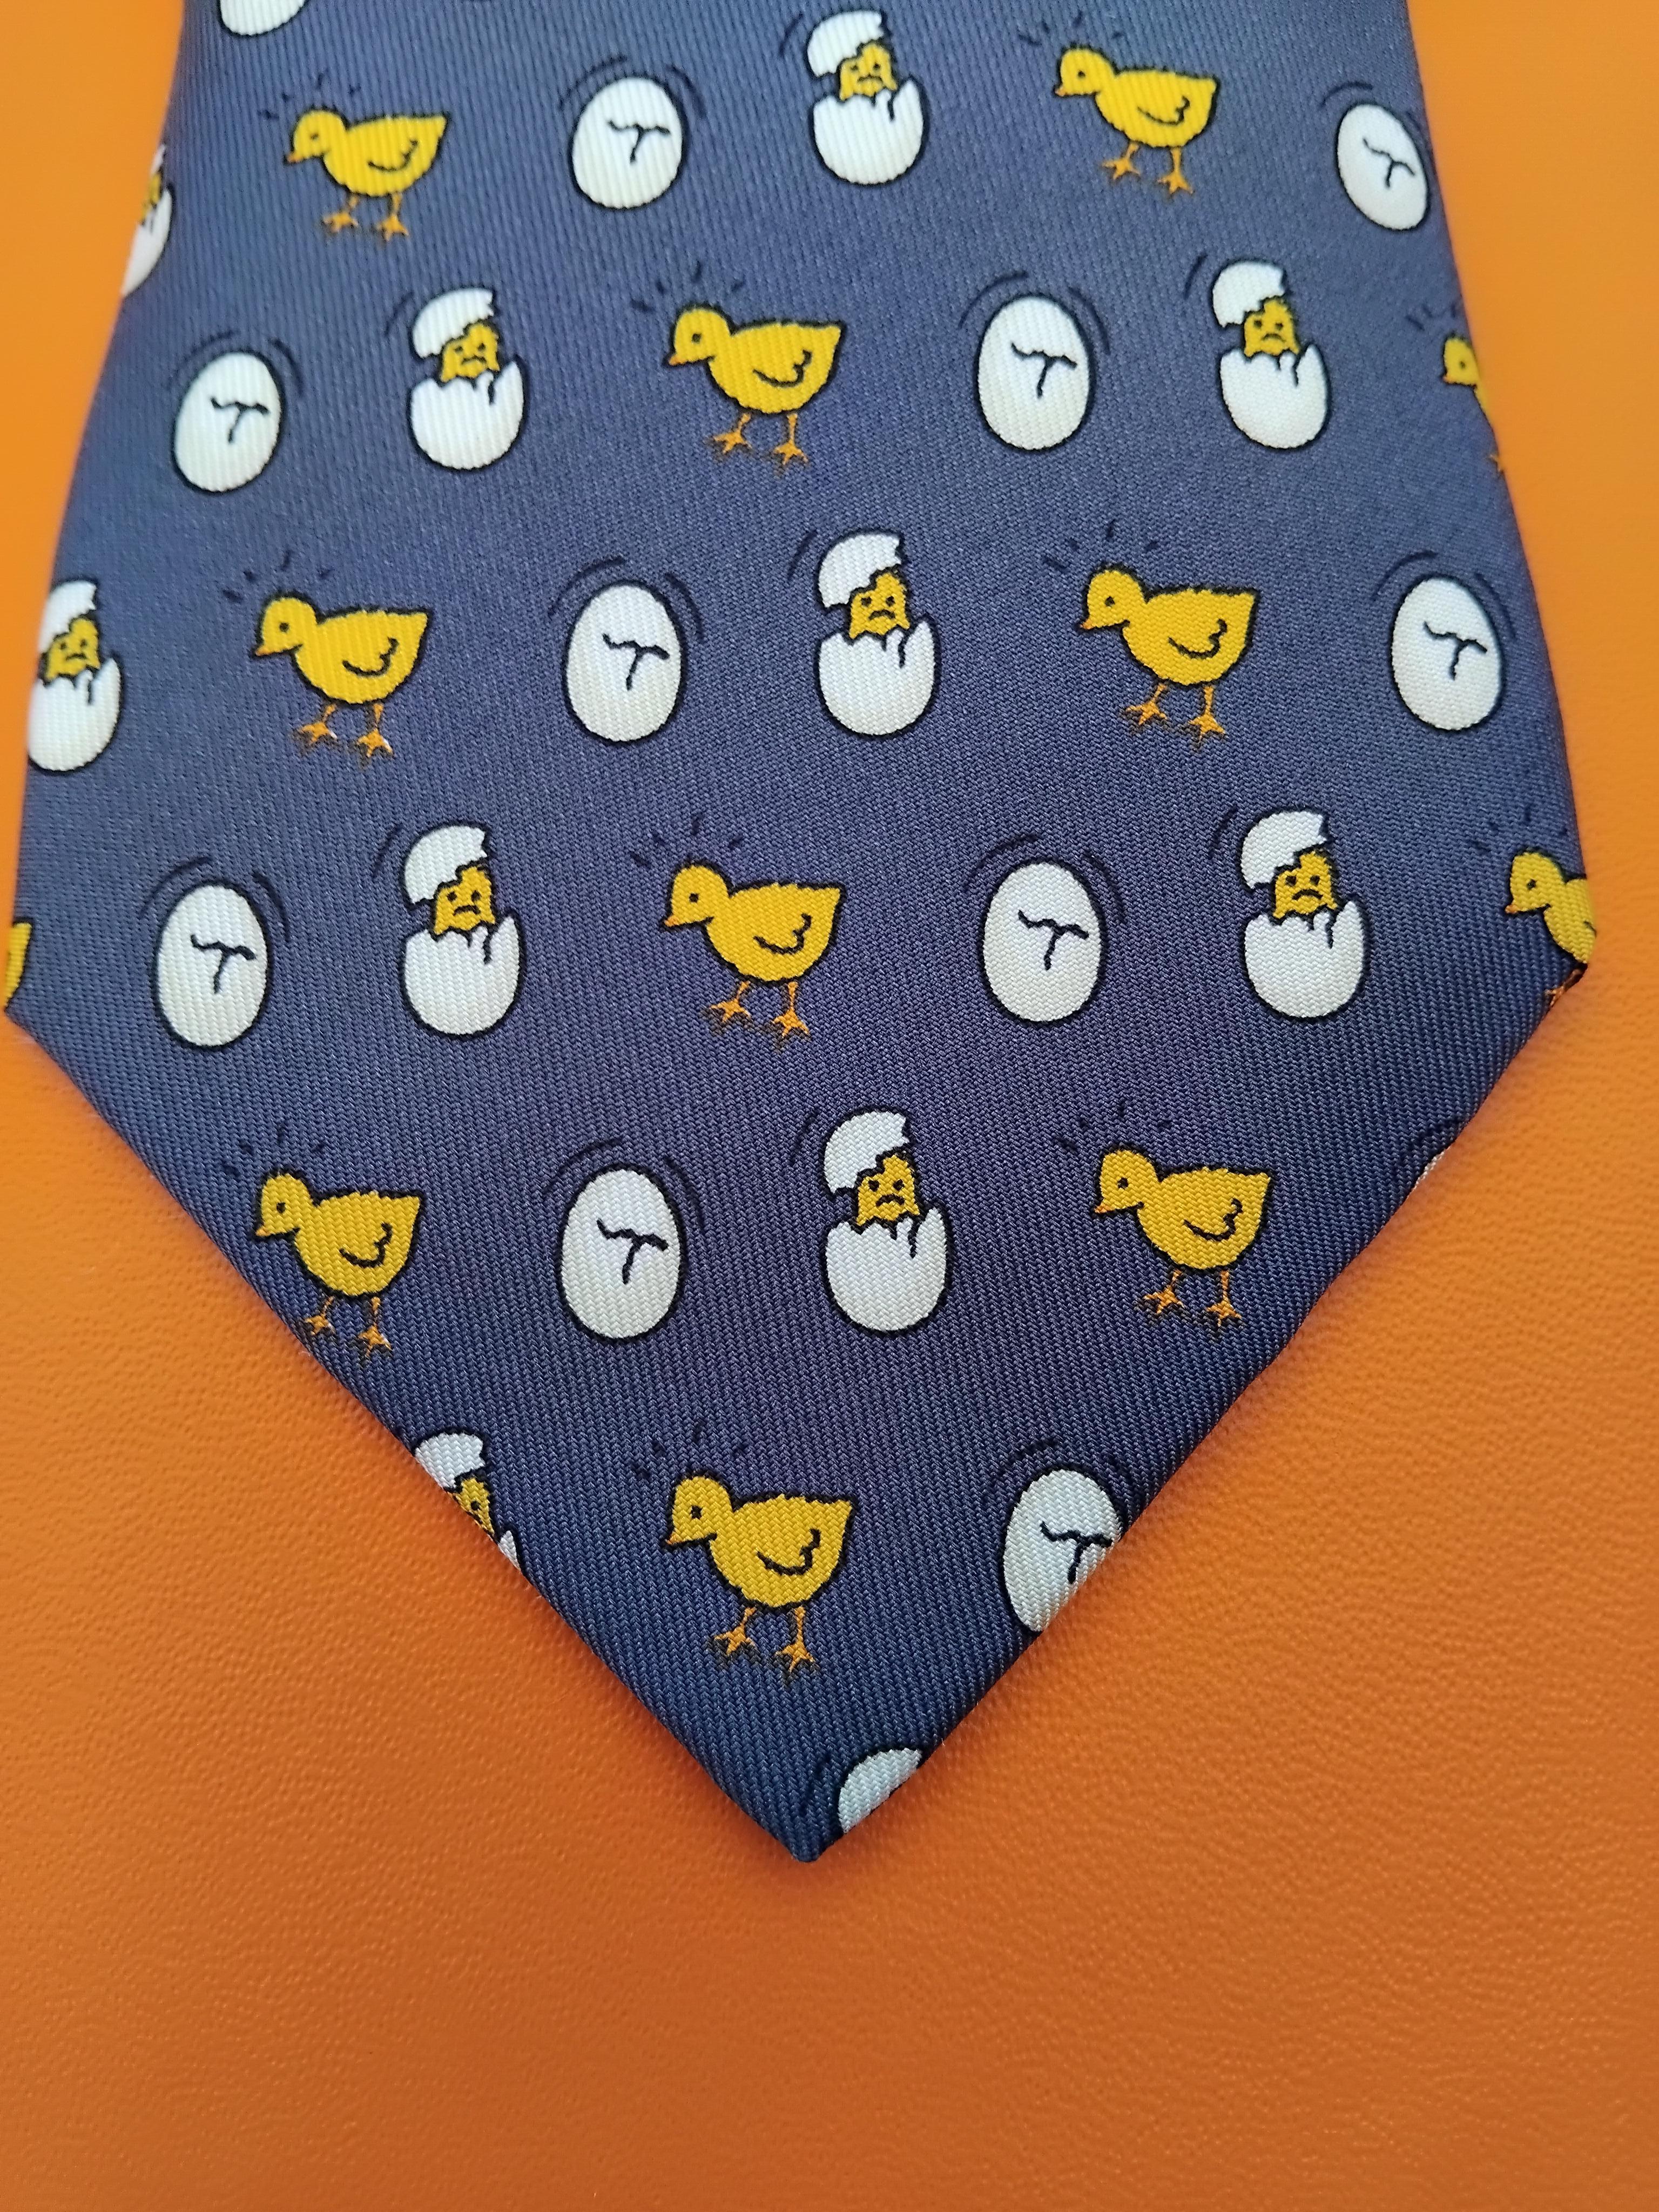 Adorable Authentic Hermès Tie

Print: chicks and eggshells

Made in France

Made of 100% Silk

Colorways: Navy Blue / Yellow / White

Lined with plain navy blue silk

